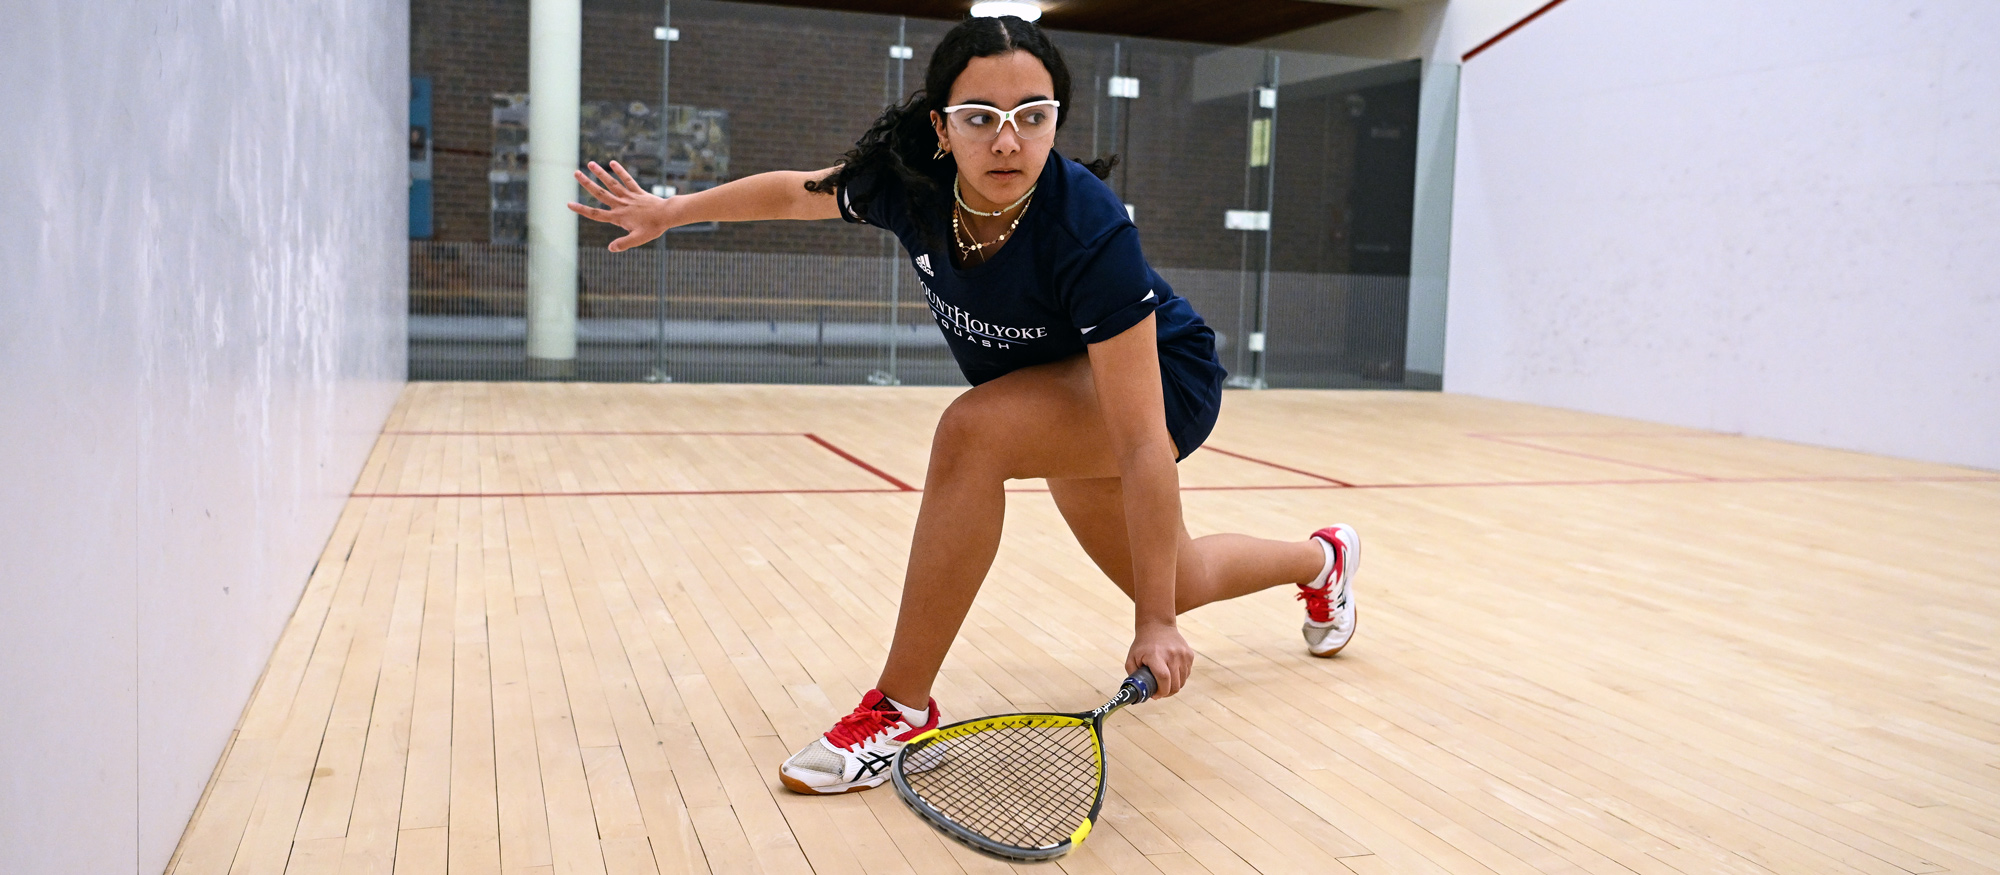 Habiba Abouelatta fell to players from Drexel and Penn in the CSA Individual National Championships on March 3, 2023. (RJB Sports file photo)